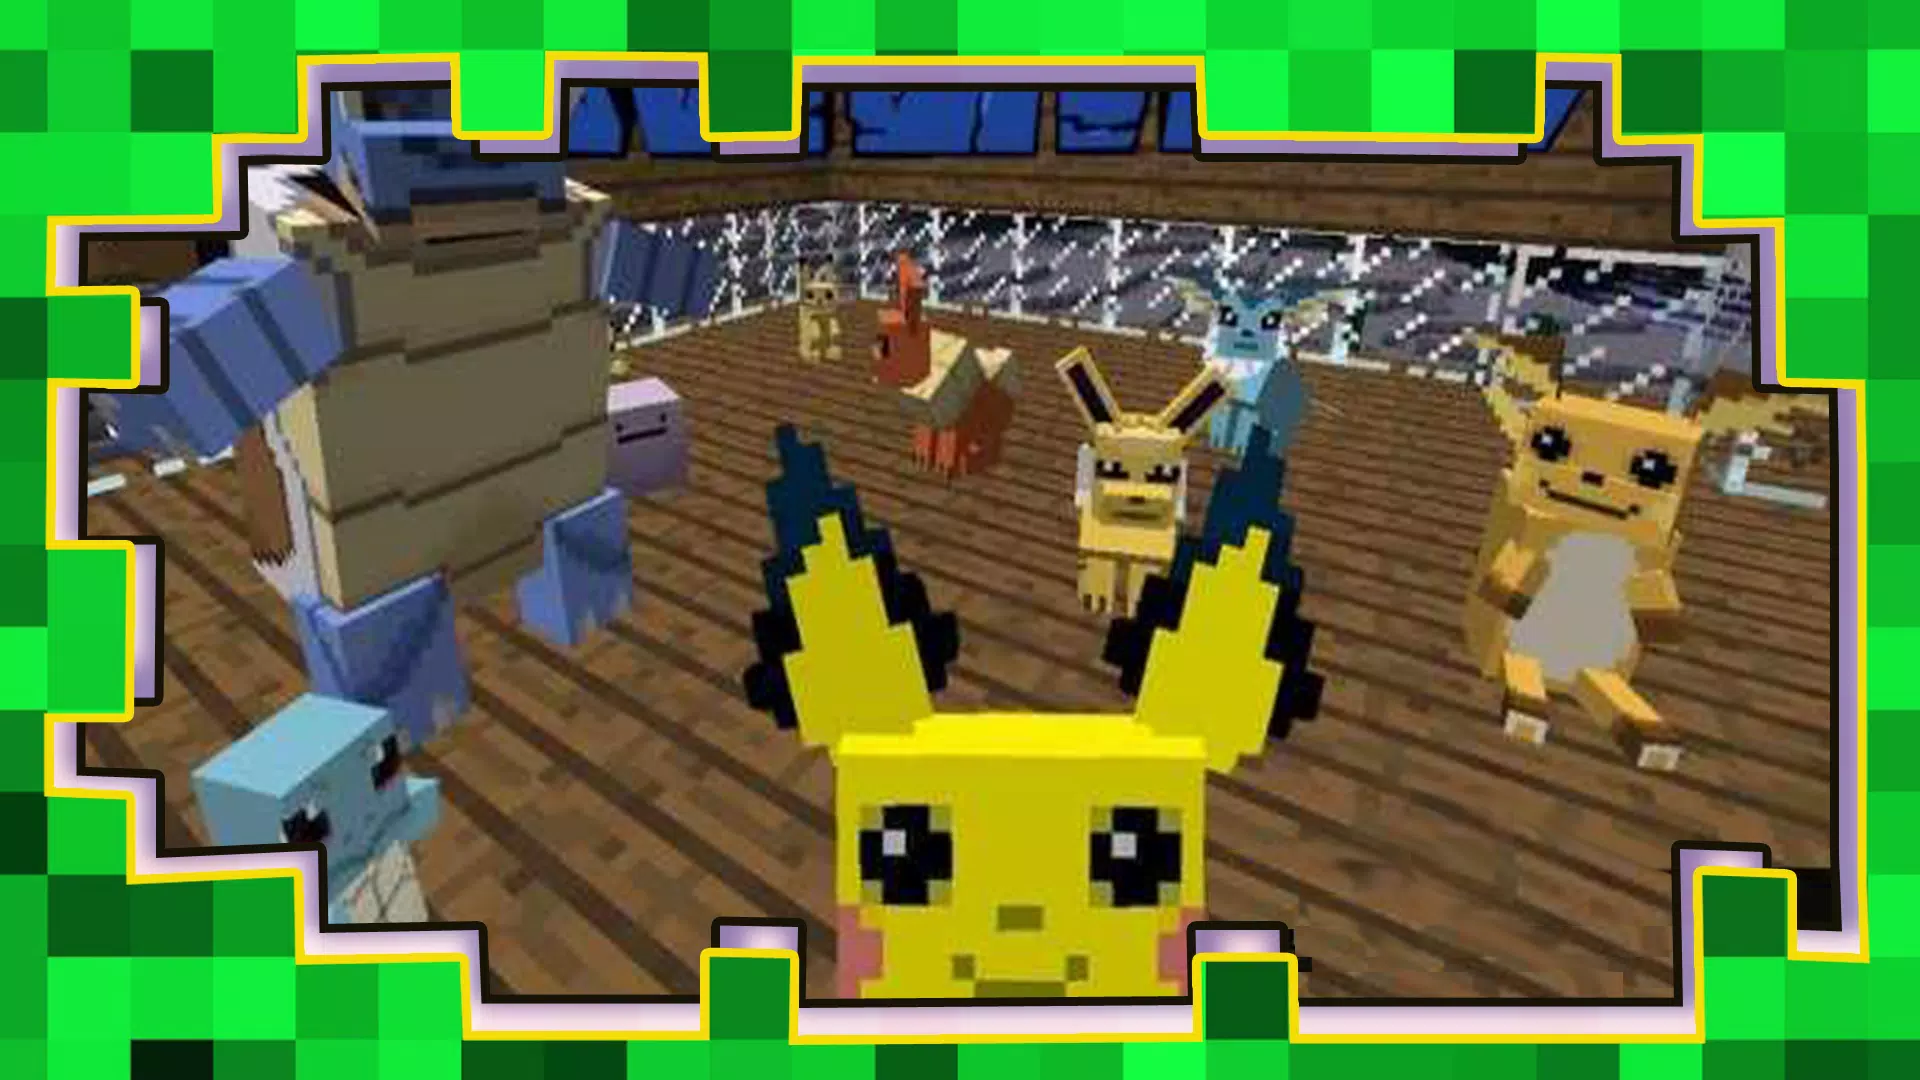 Mod Pokemon Go Minecraft Games for Android - Download